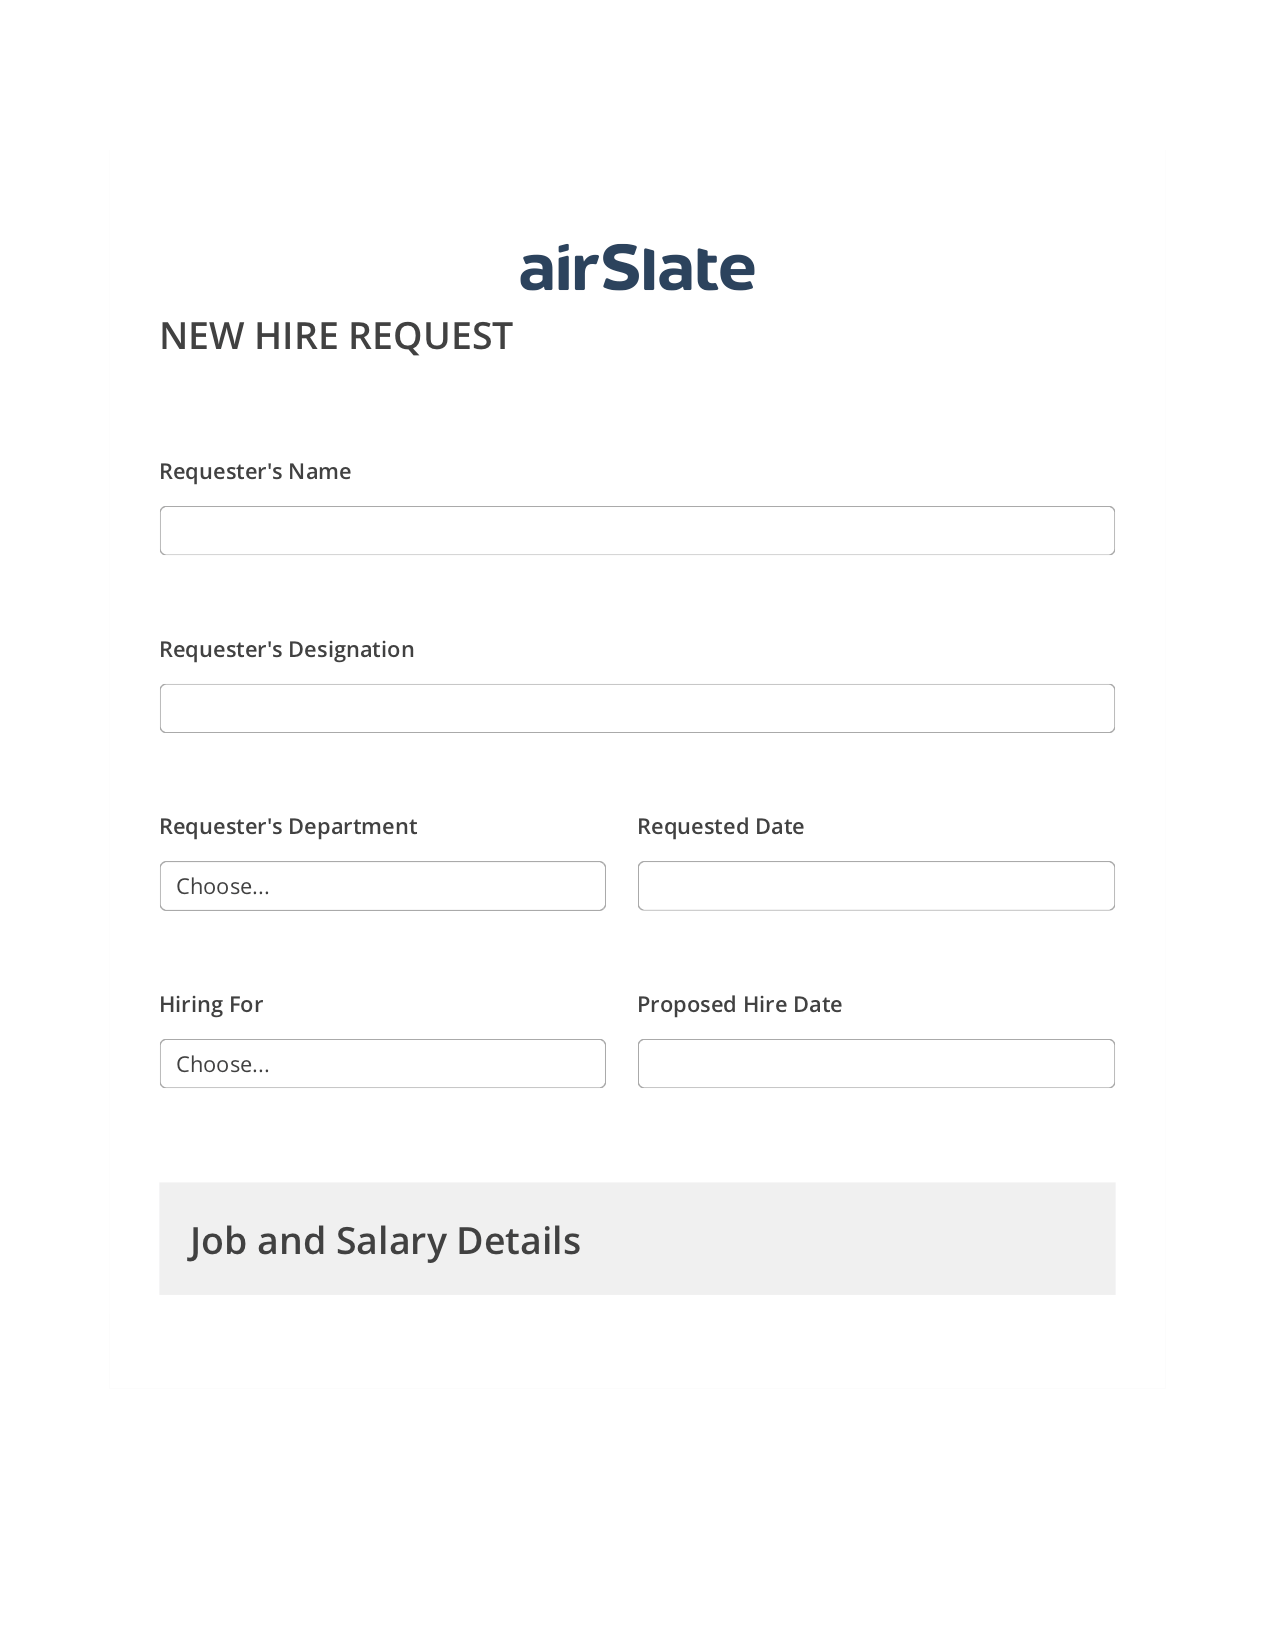 Multirole Hiring Request Workflow Pre-fill Dropdowns from Excel Bot, Create slate from another Flow Bot, Export to Excel 365 Bot